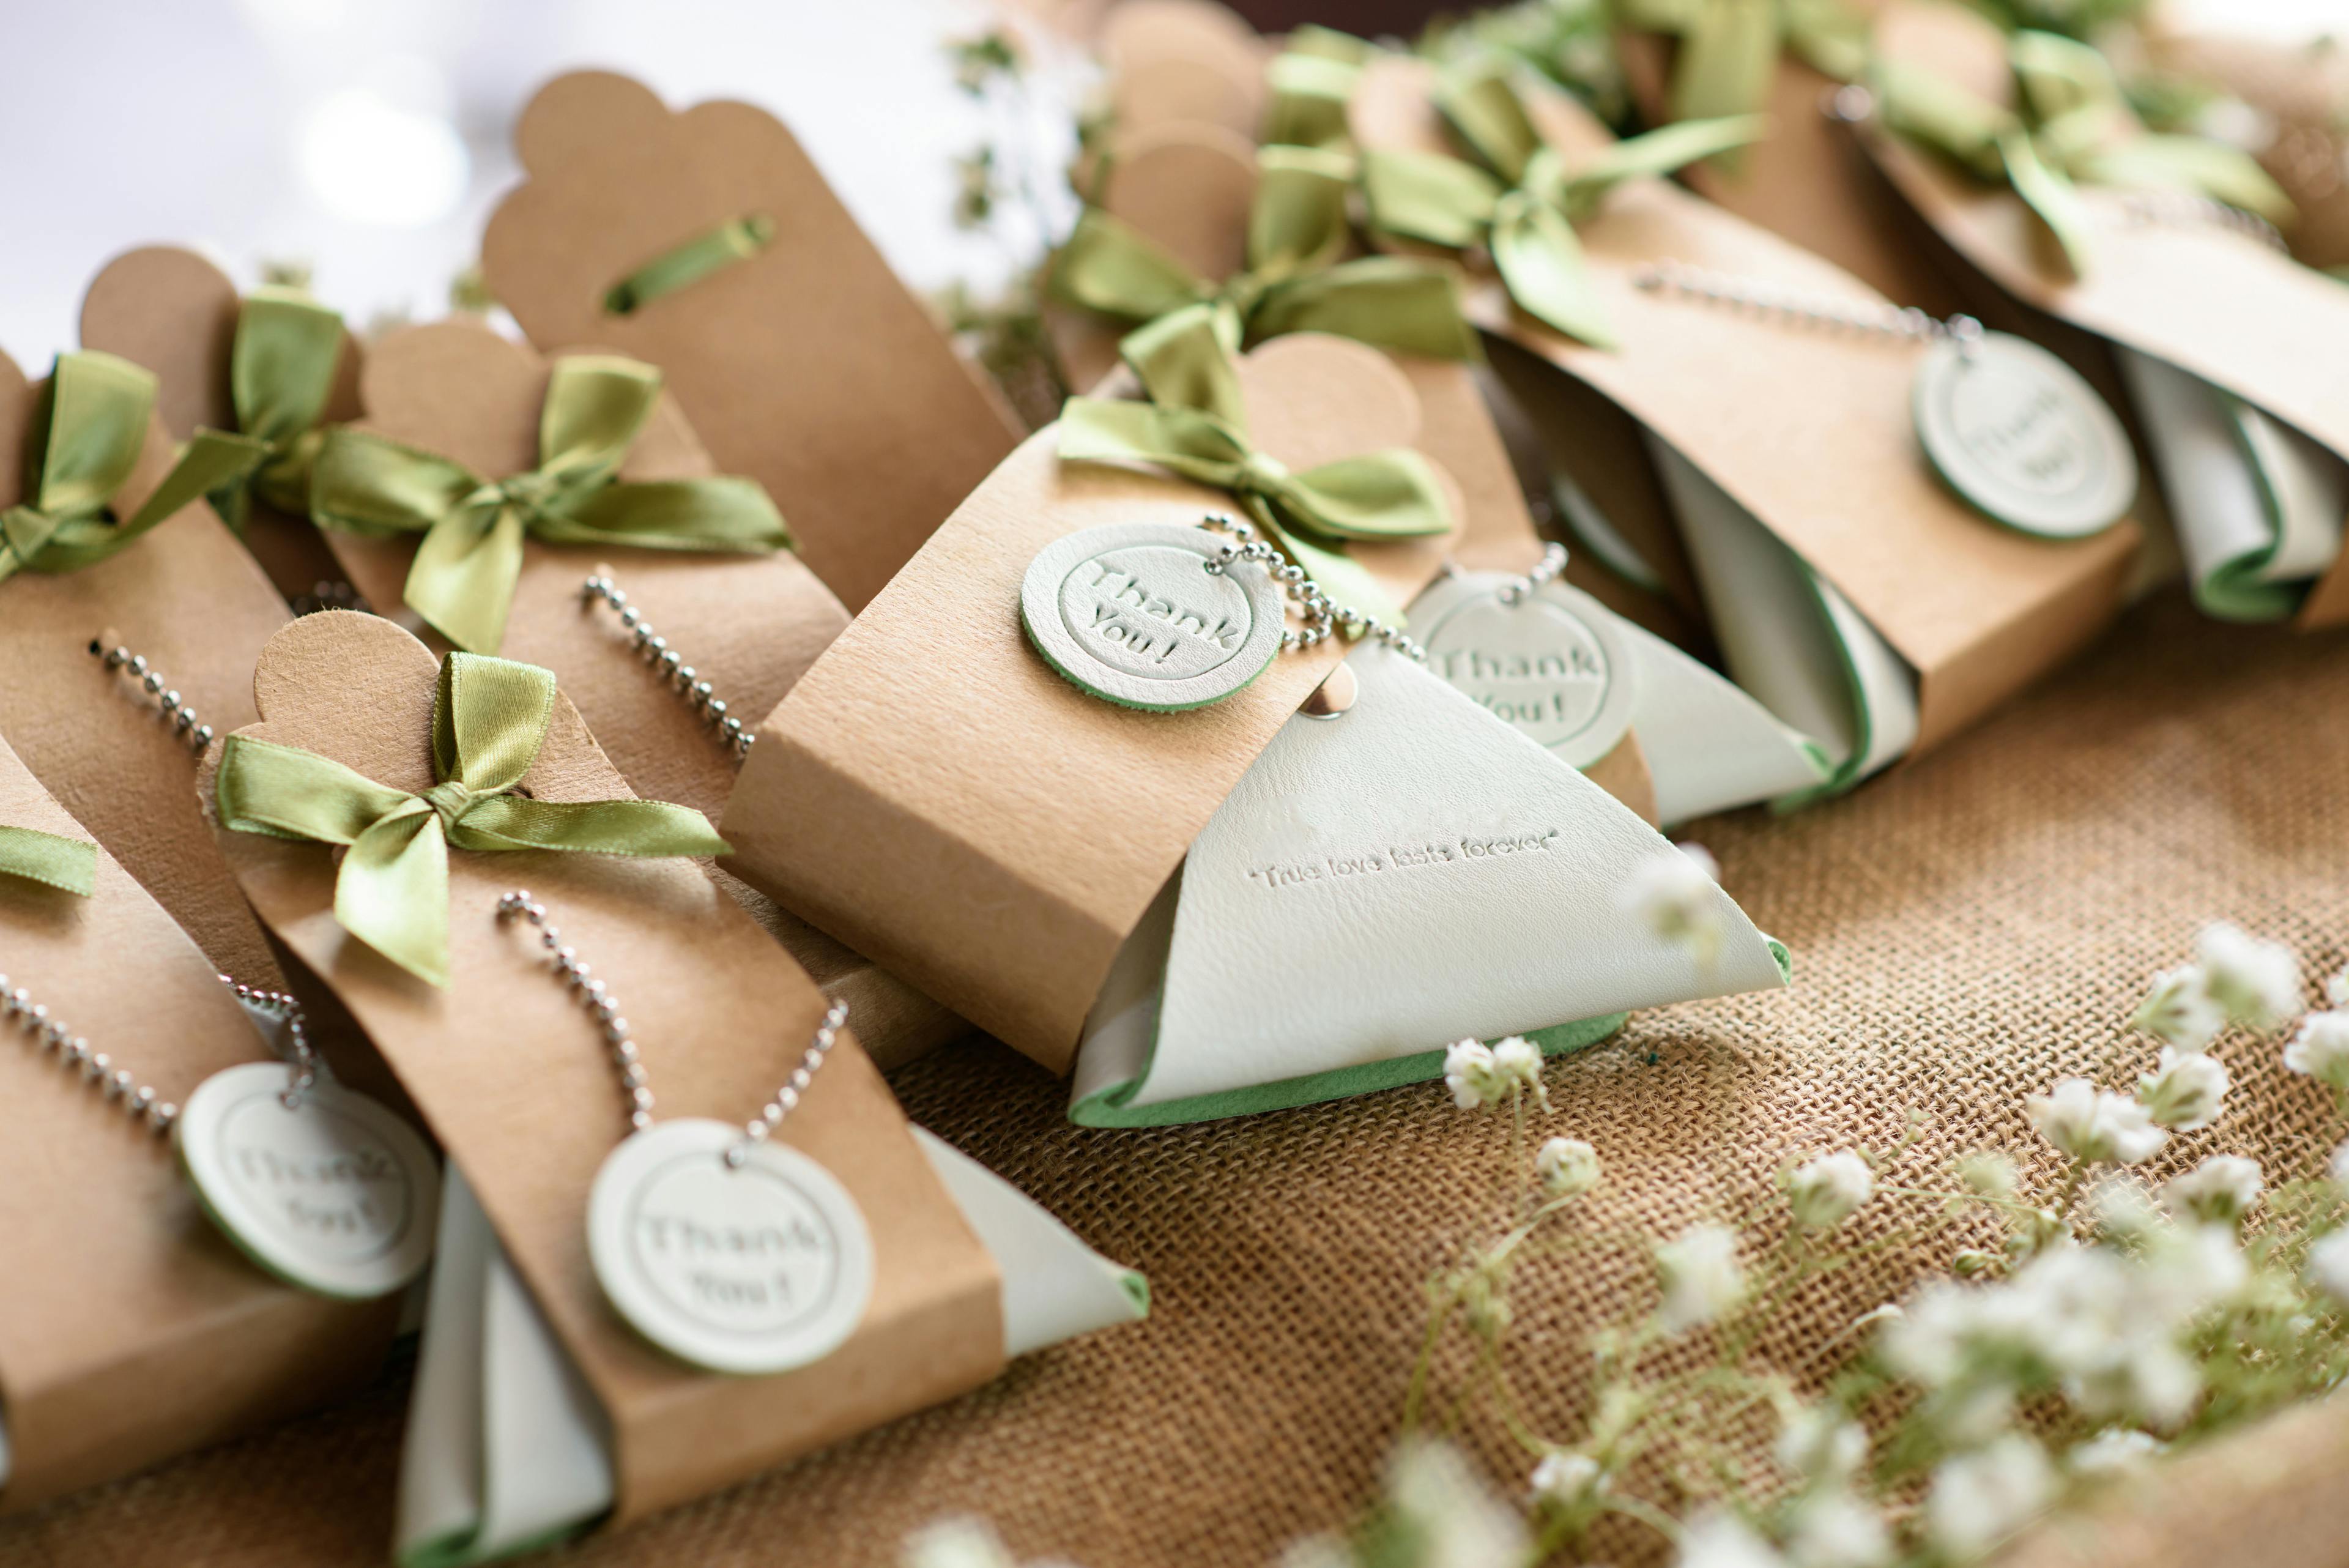 8 Meaningful favors for a truly Catholic wedding